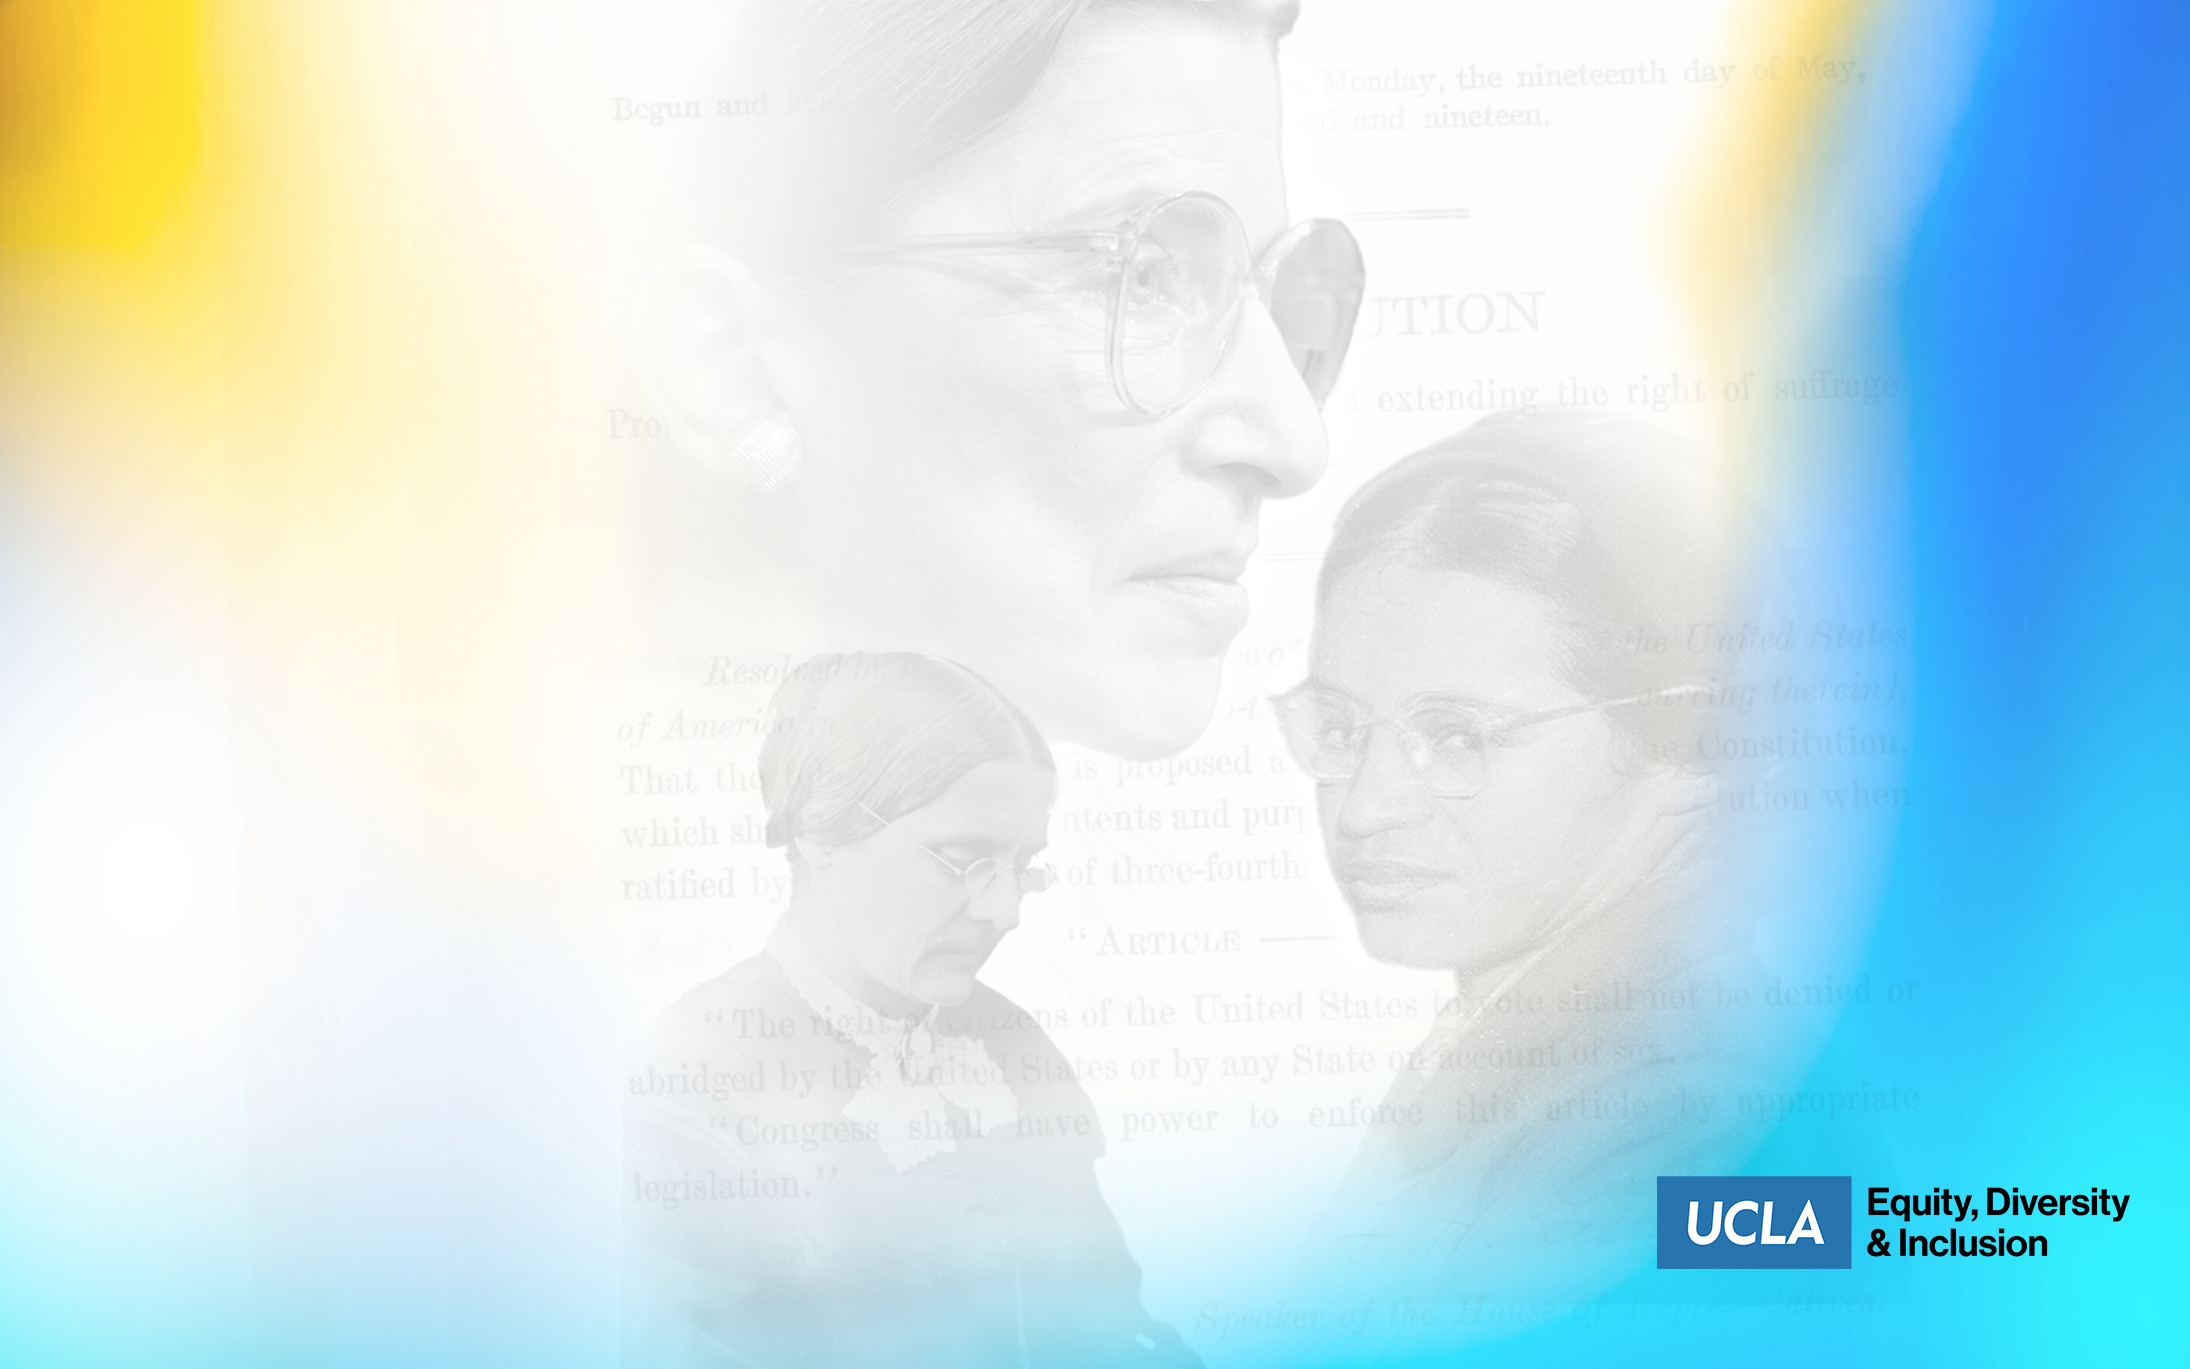 graphic celebrating women's history month (march 2022), featuring photos of rosa parks, ruth bader ginsburg, and susan b. anthony